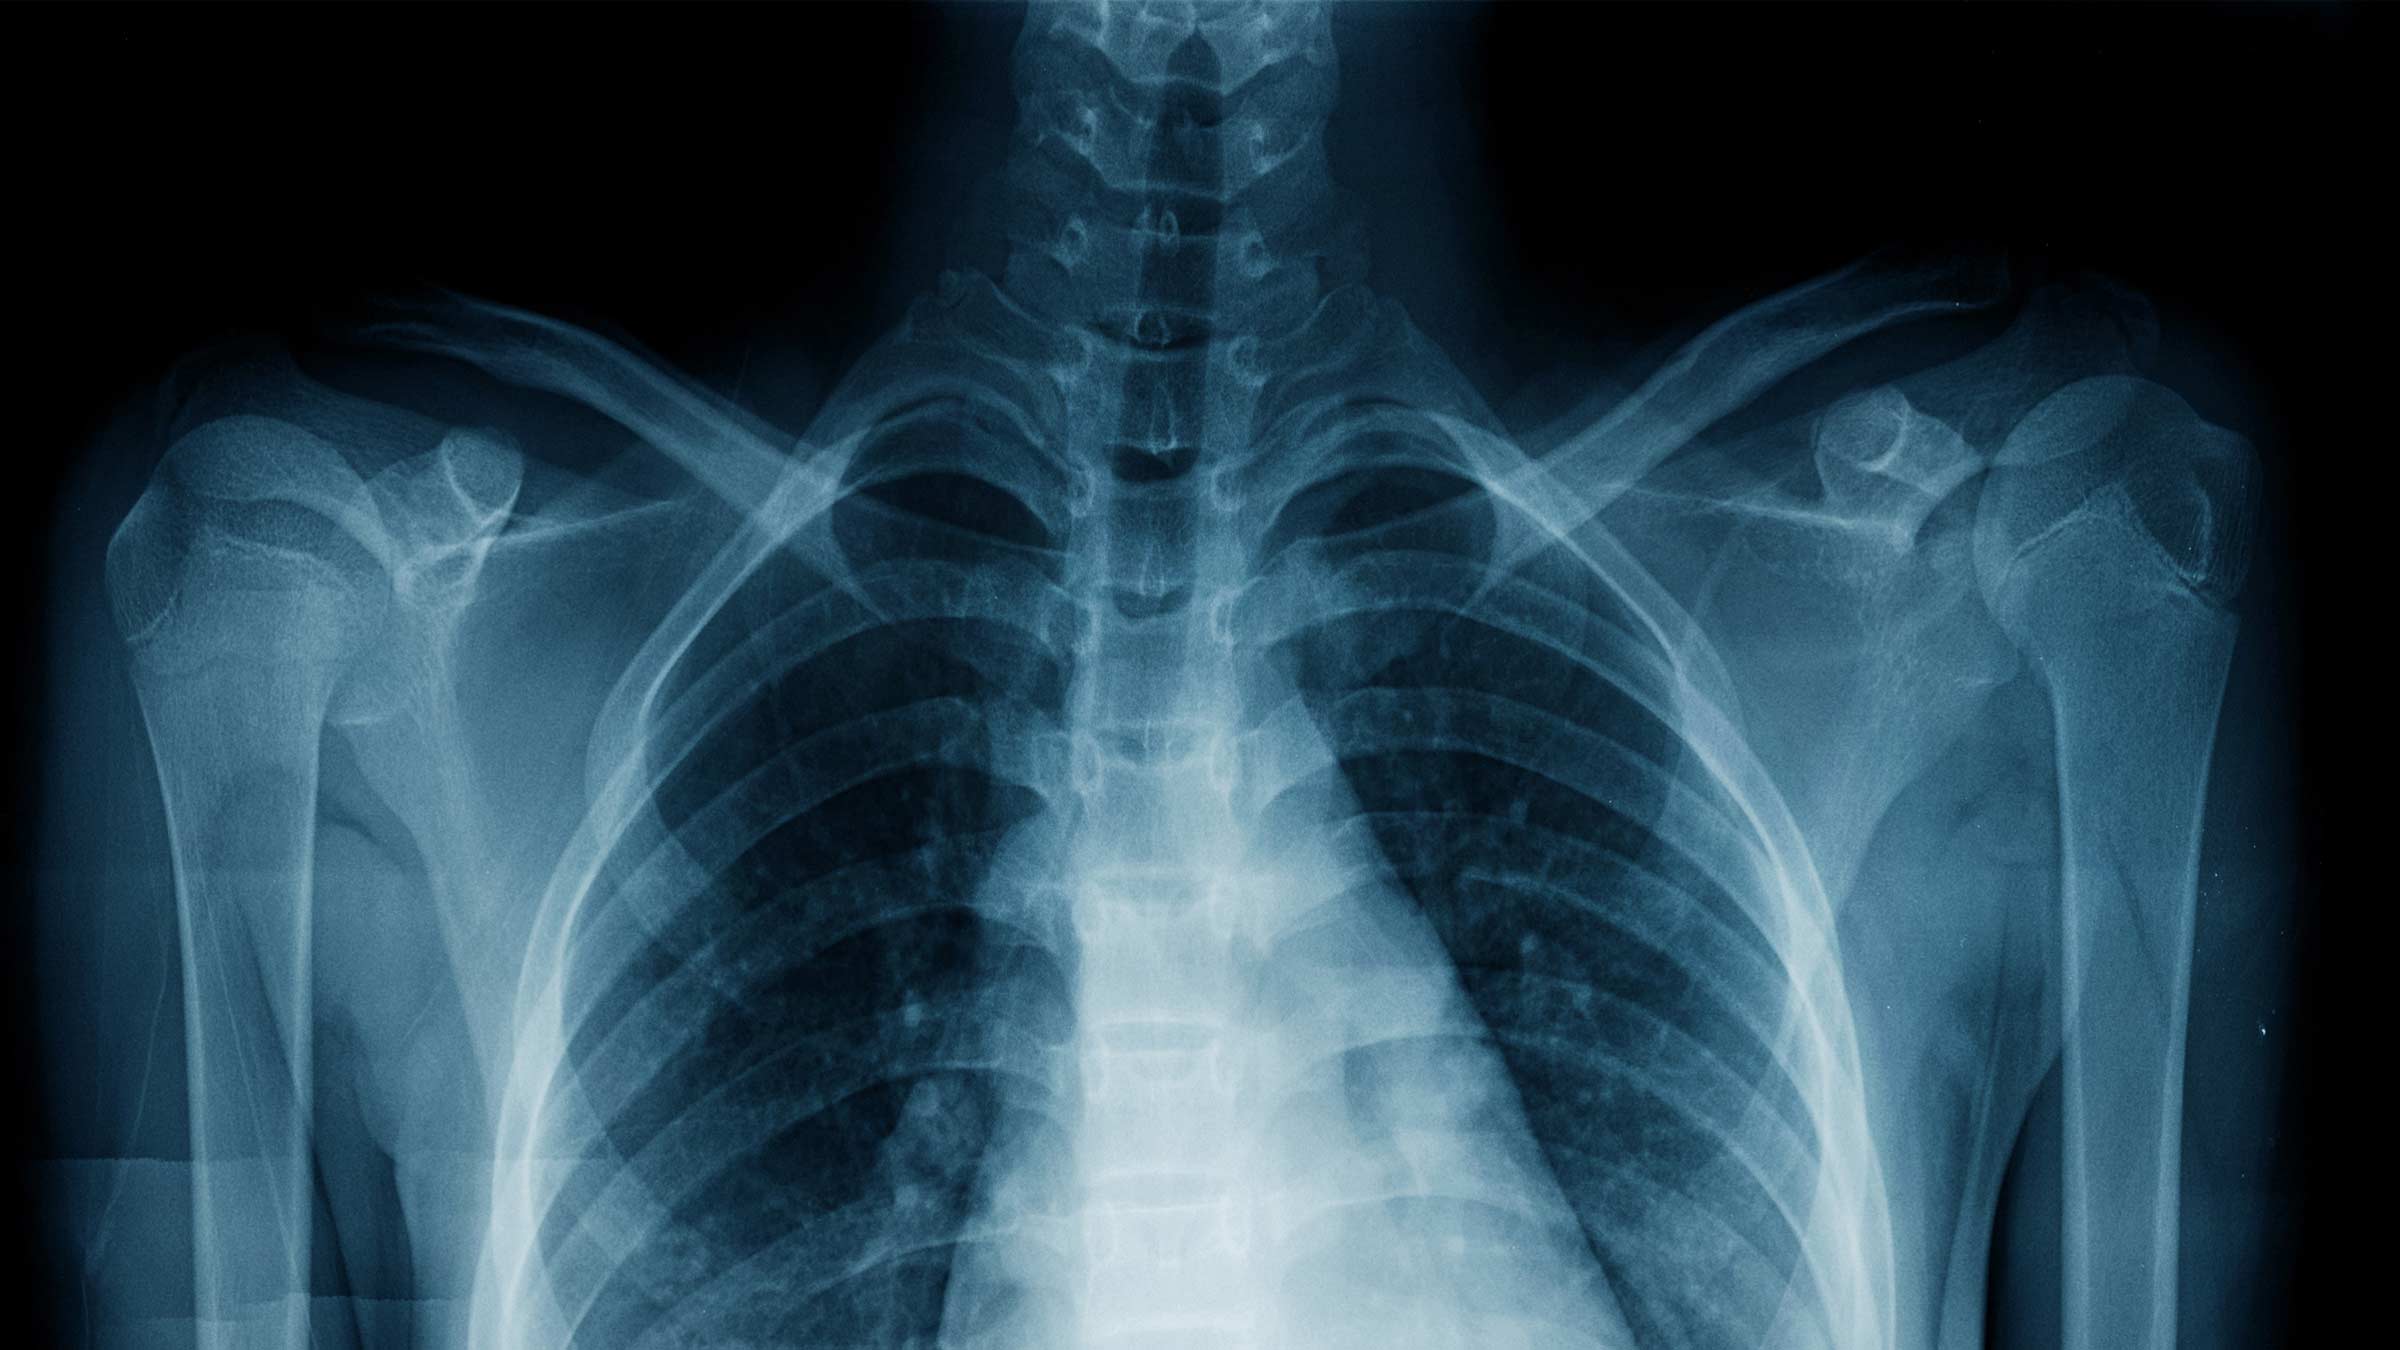 Close up image of a chest x-ray